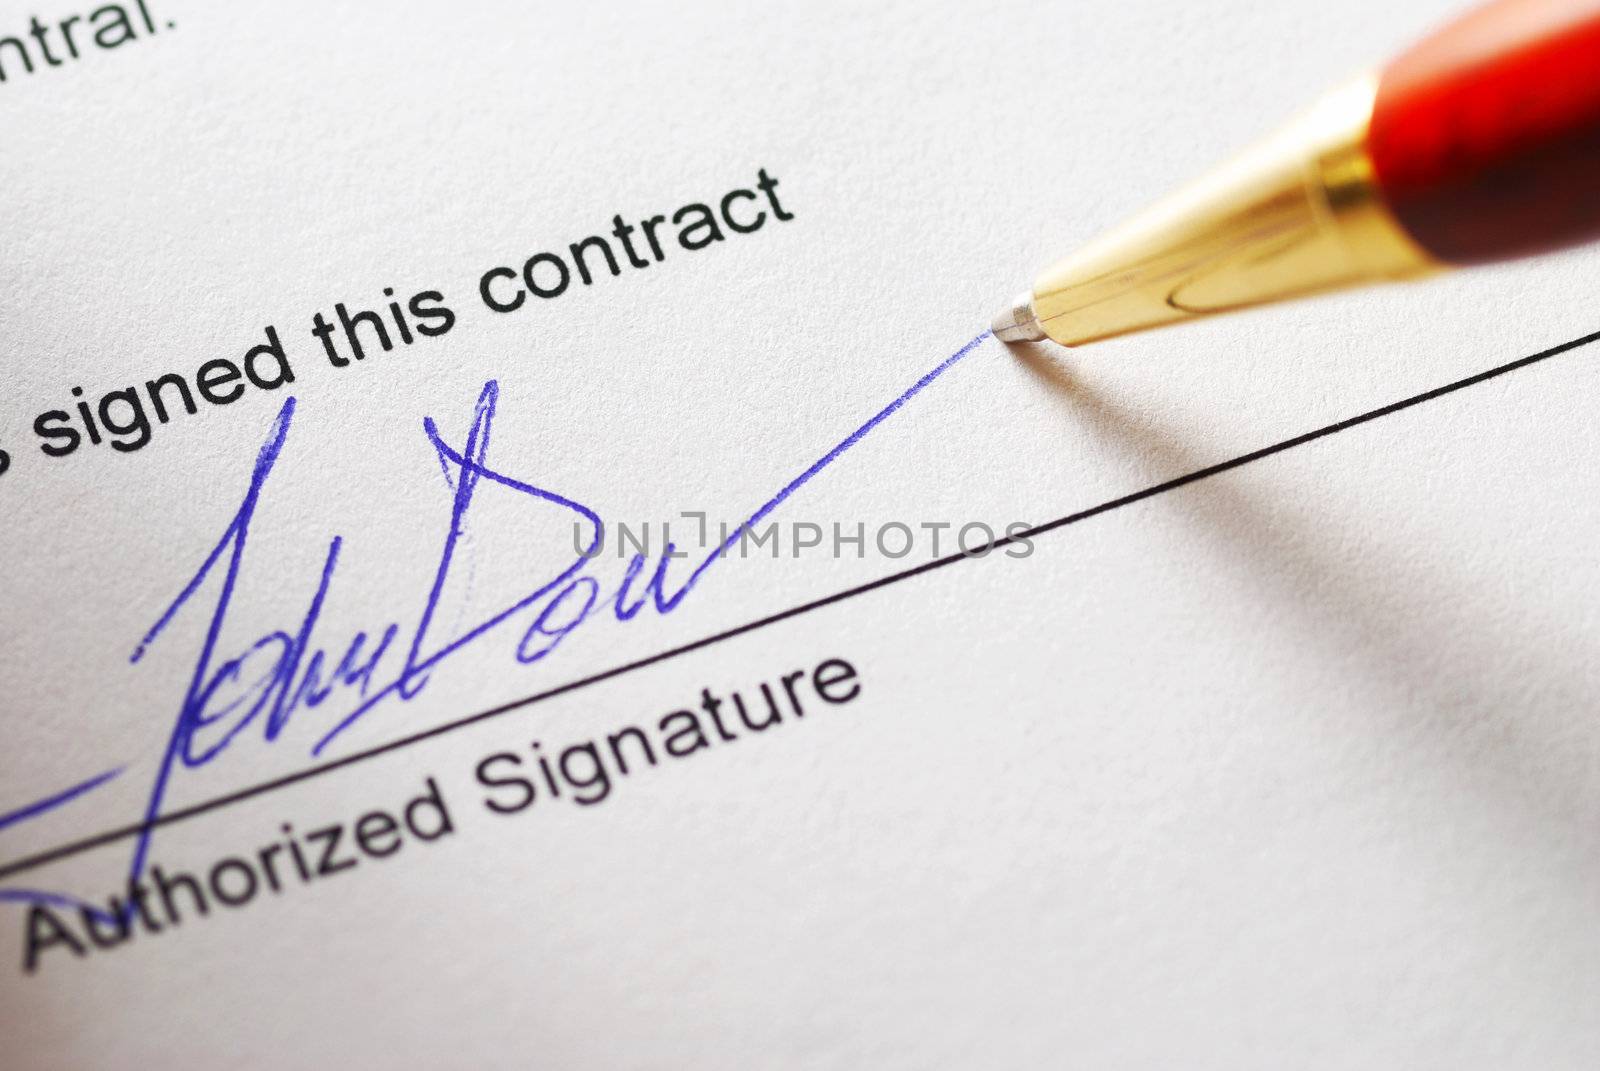 Signing a contract. Shallow depth of field.